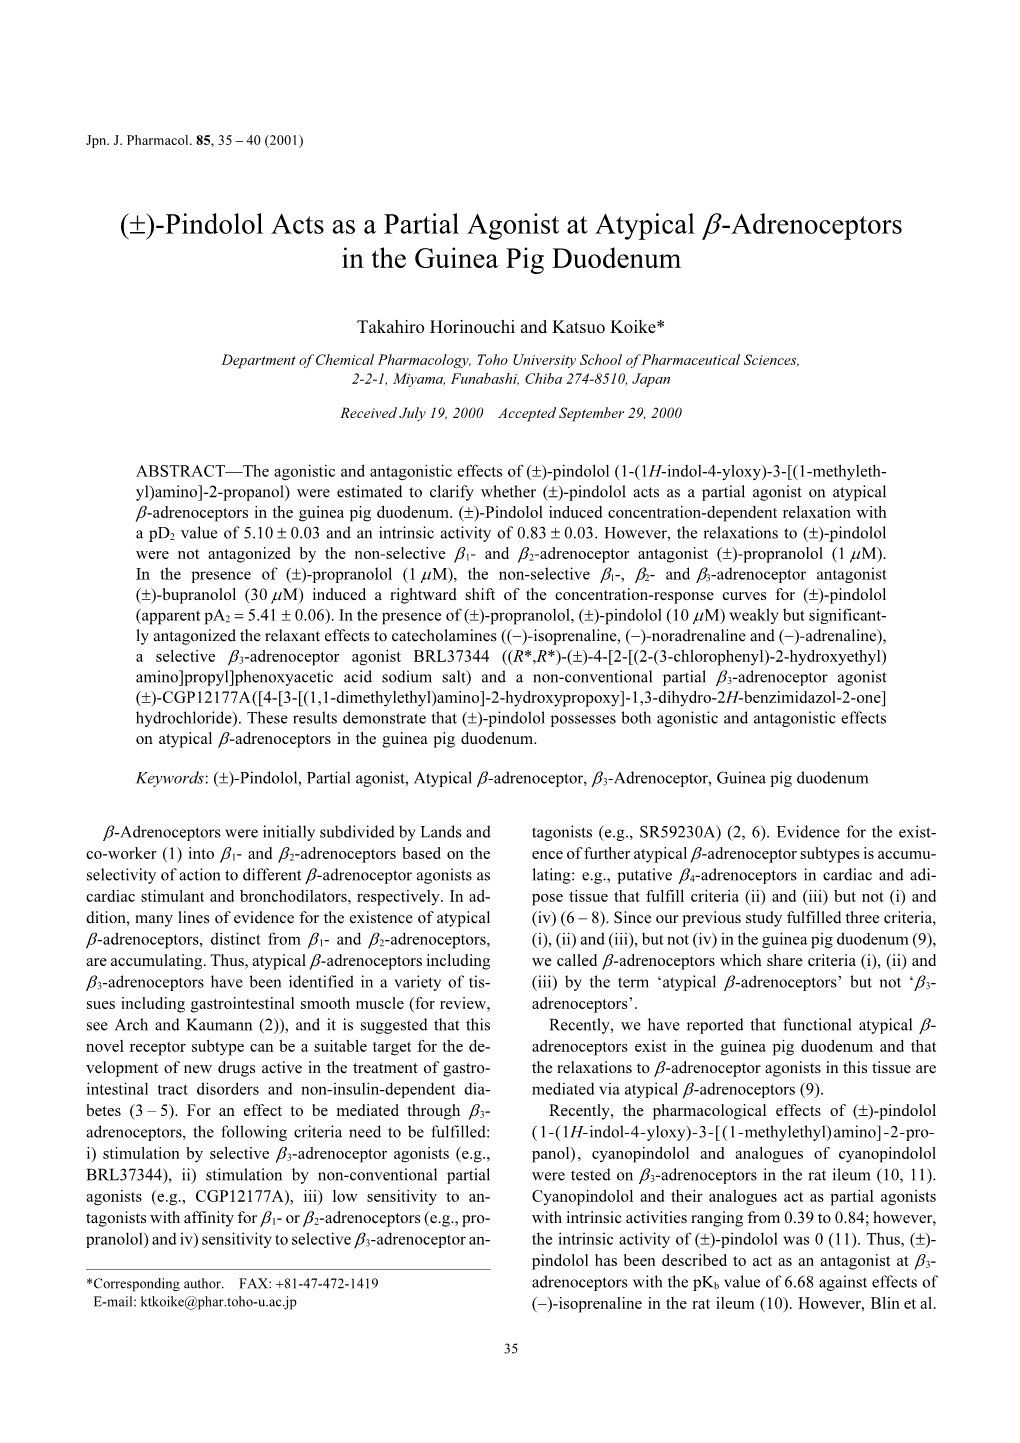 (±)-Pindolol Acts As a Partial Agonist at Atypical &gt;-Adrenoceptors in The